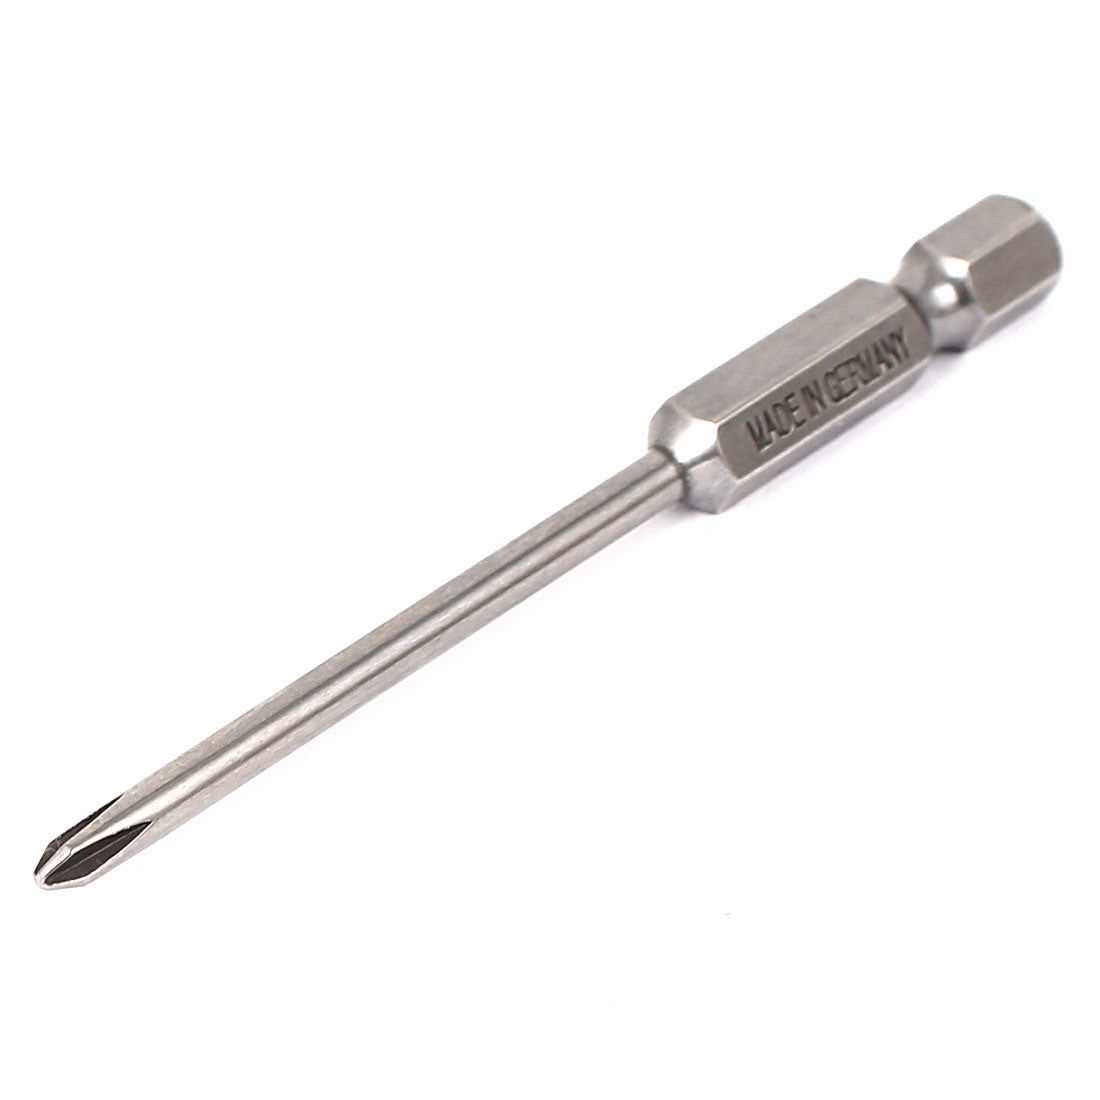 Uxcell Uxcell Hex Shank 4.5mm Tip PH1 Magnetic Phillips Screwdriver Bit